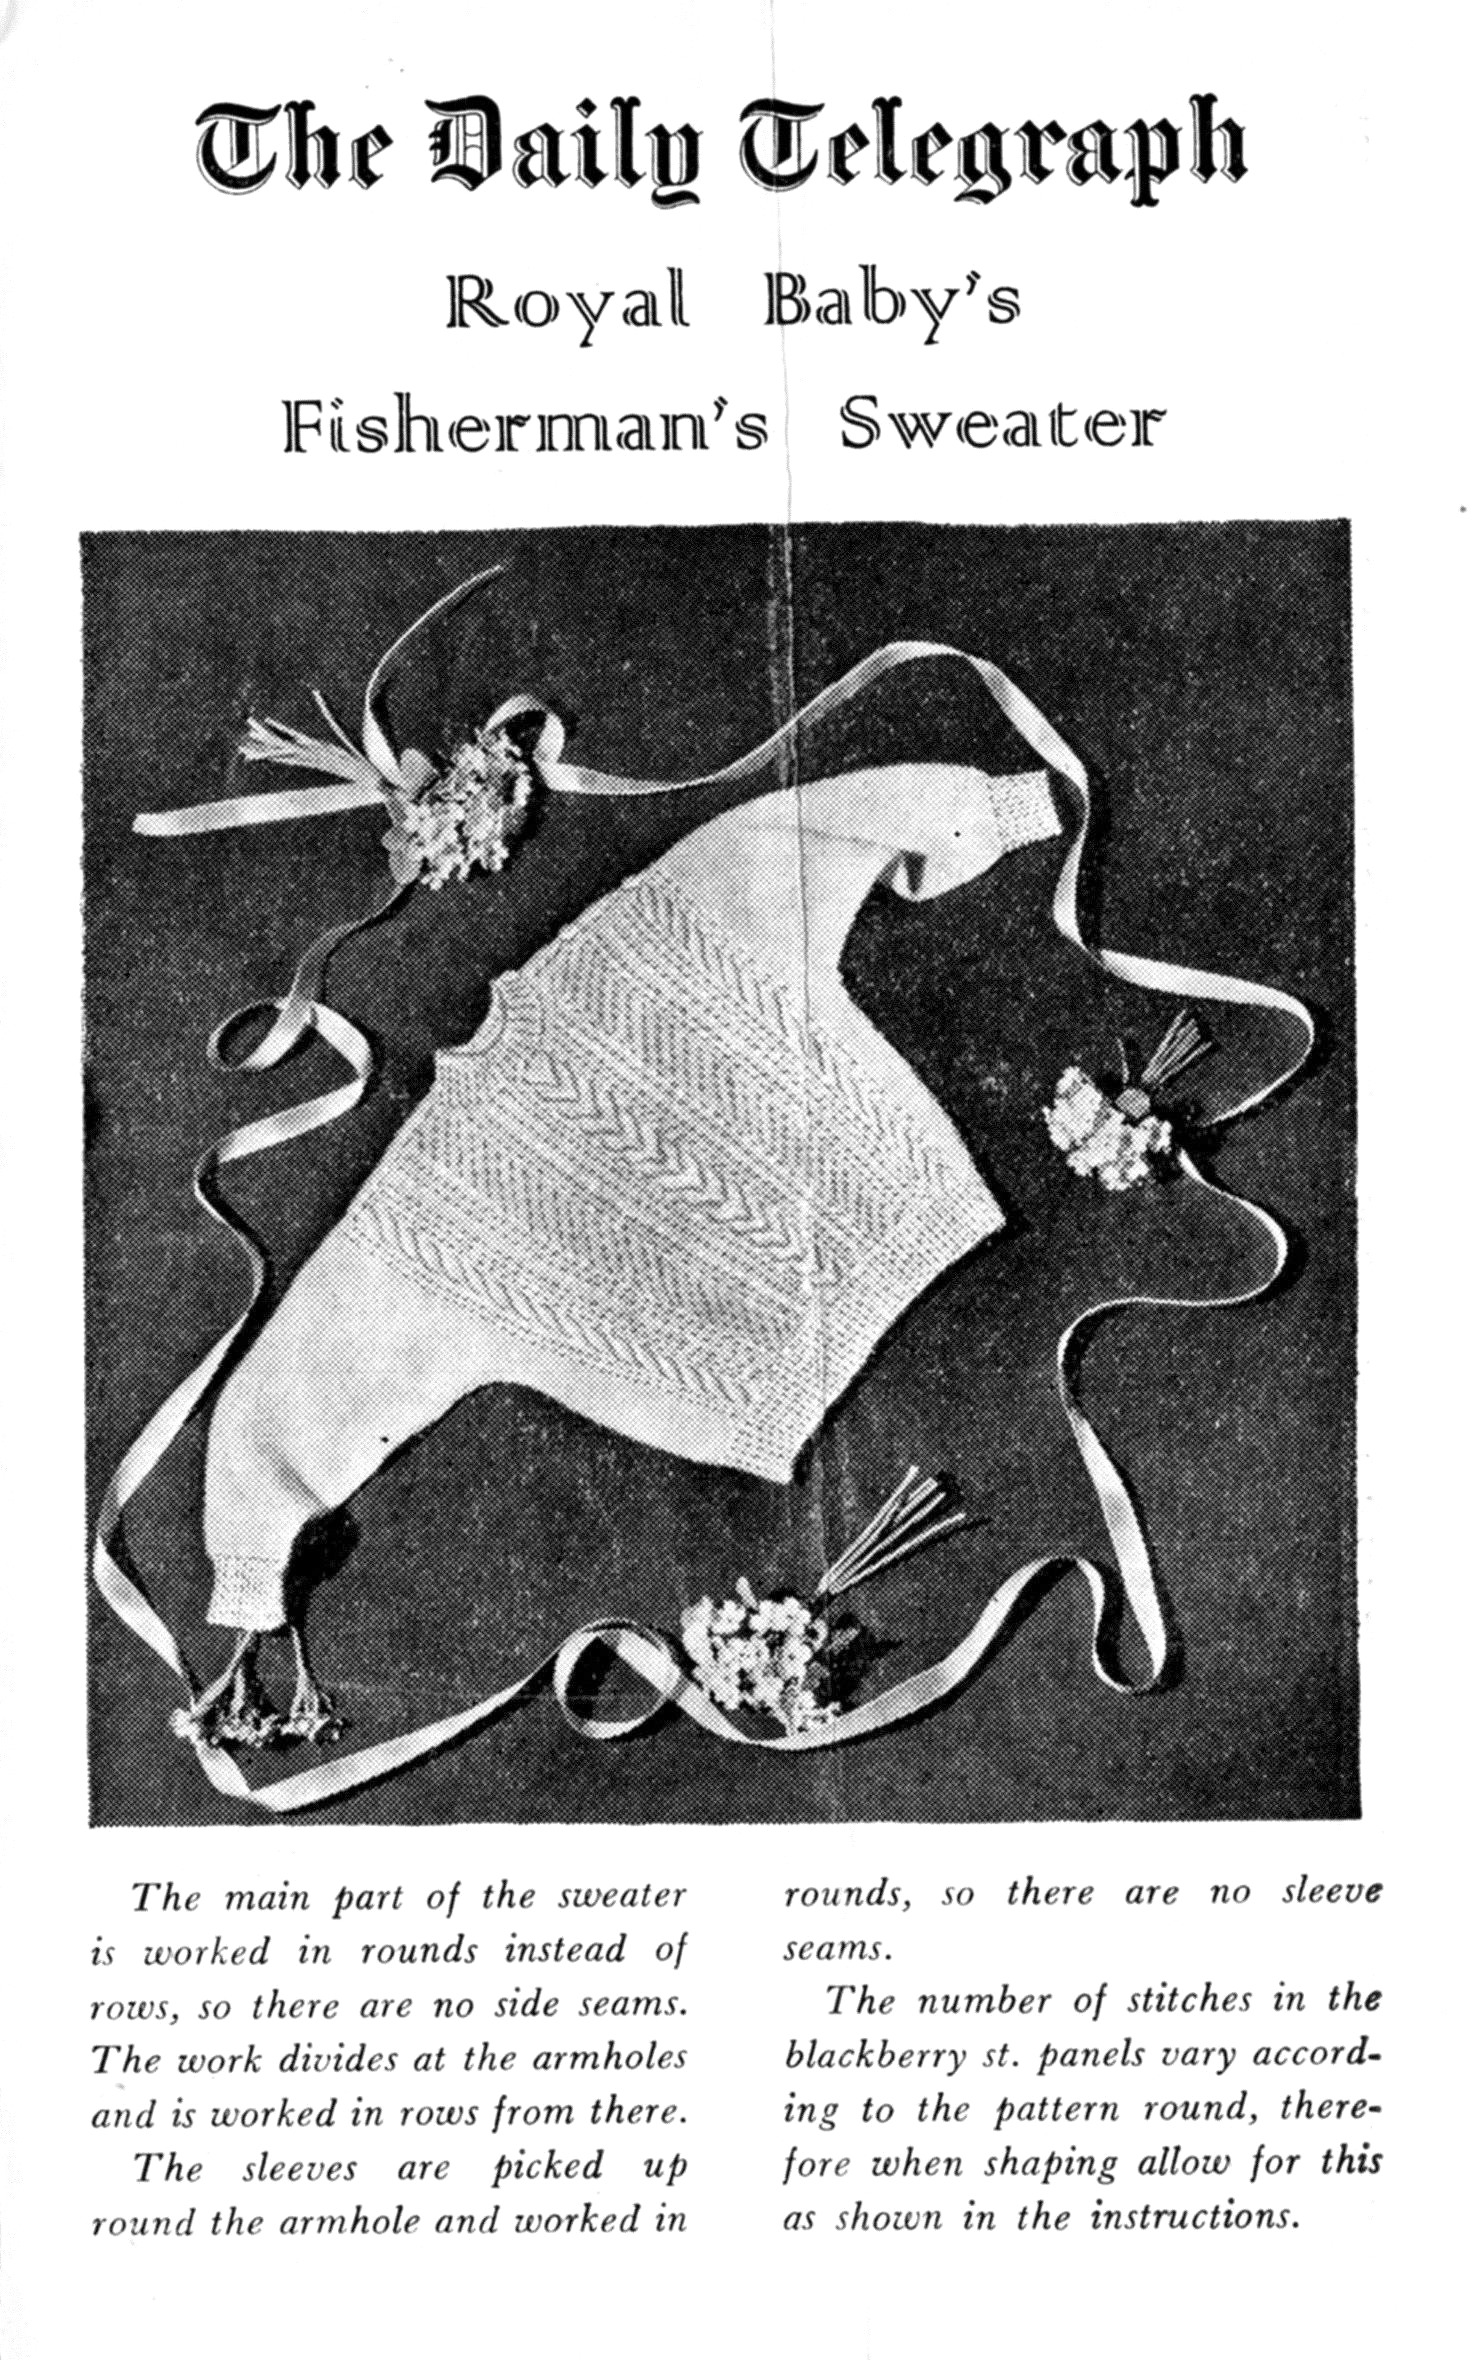 Cover of Daily Telegraph leaflet: Roya; Baby's Fisherman's Sweater. Sweater with cable, arrow and honeycomb design surrounded by ribbons and posies.